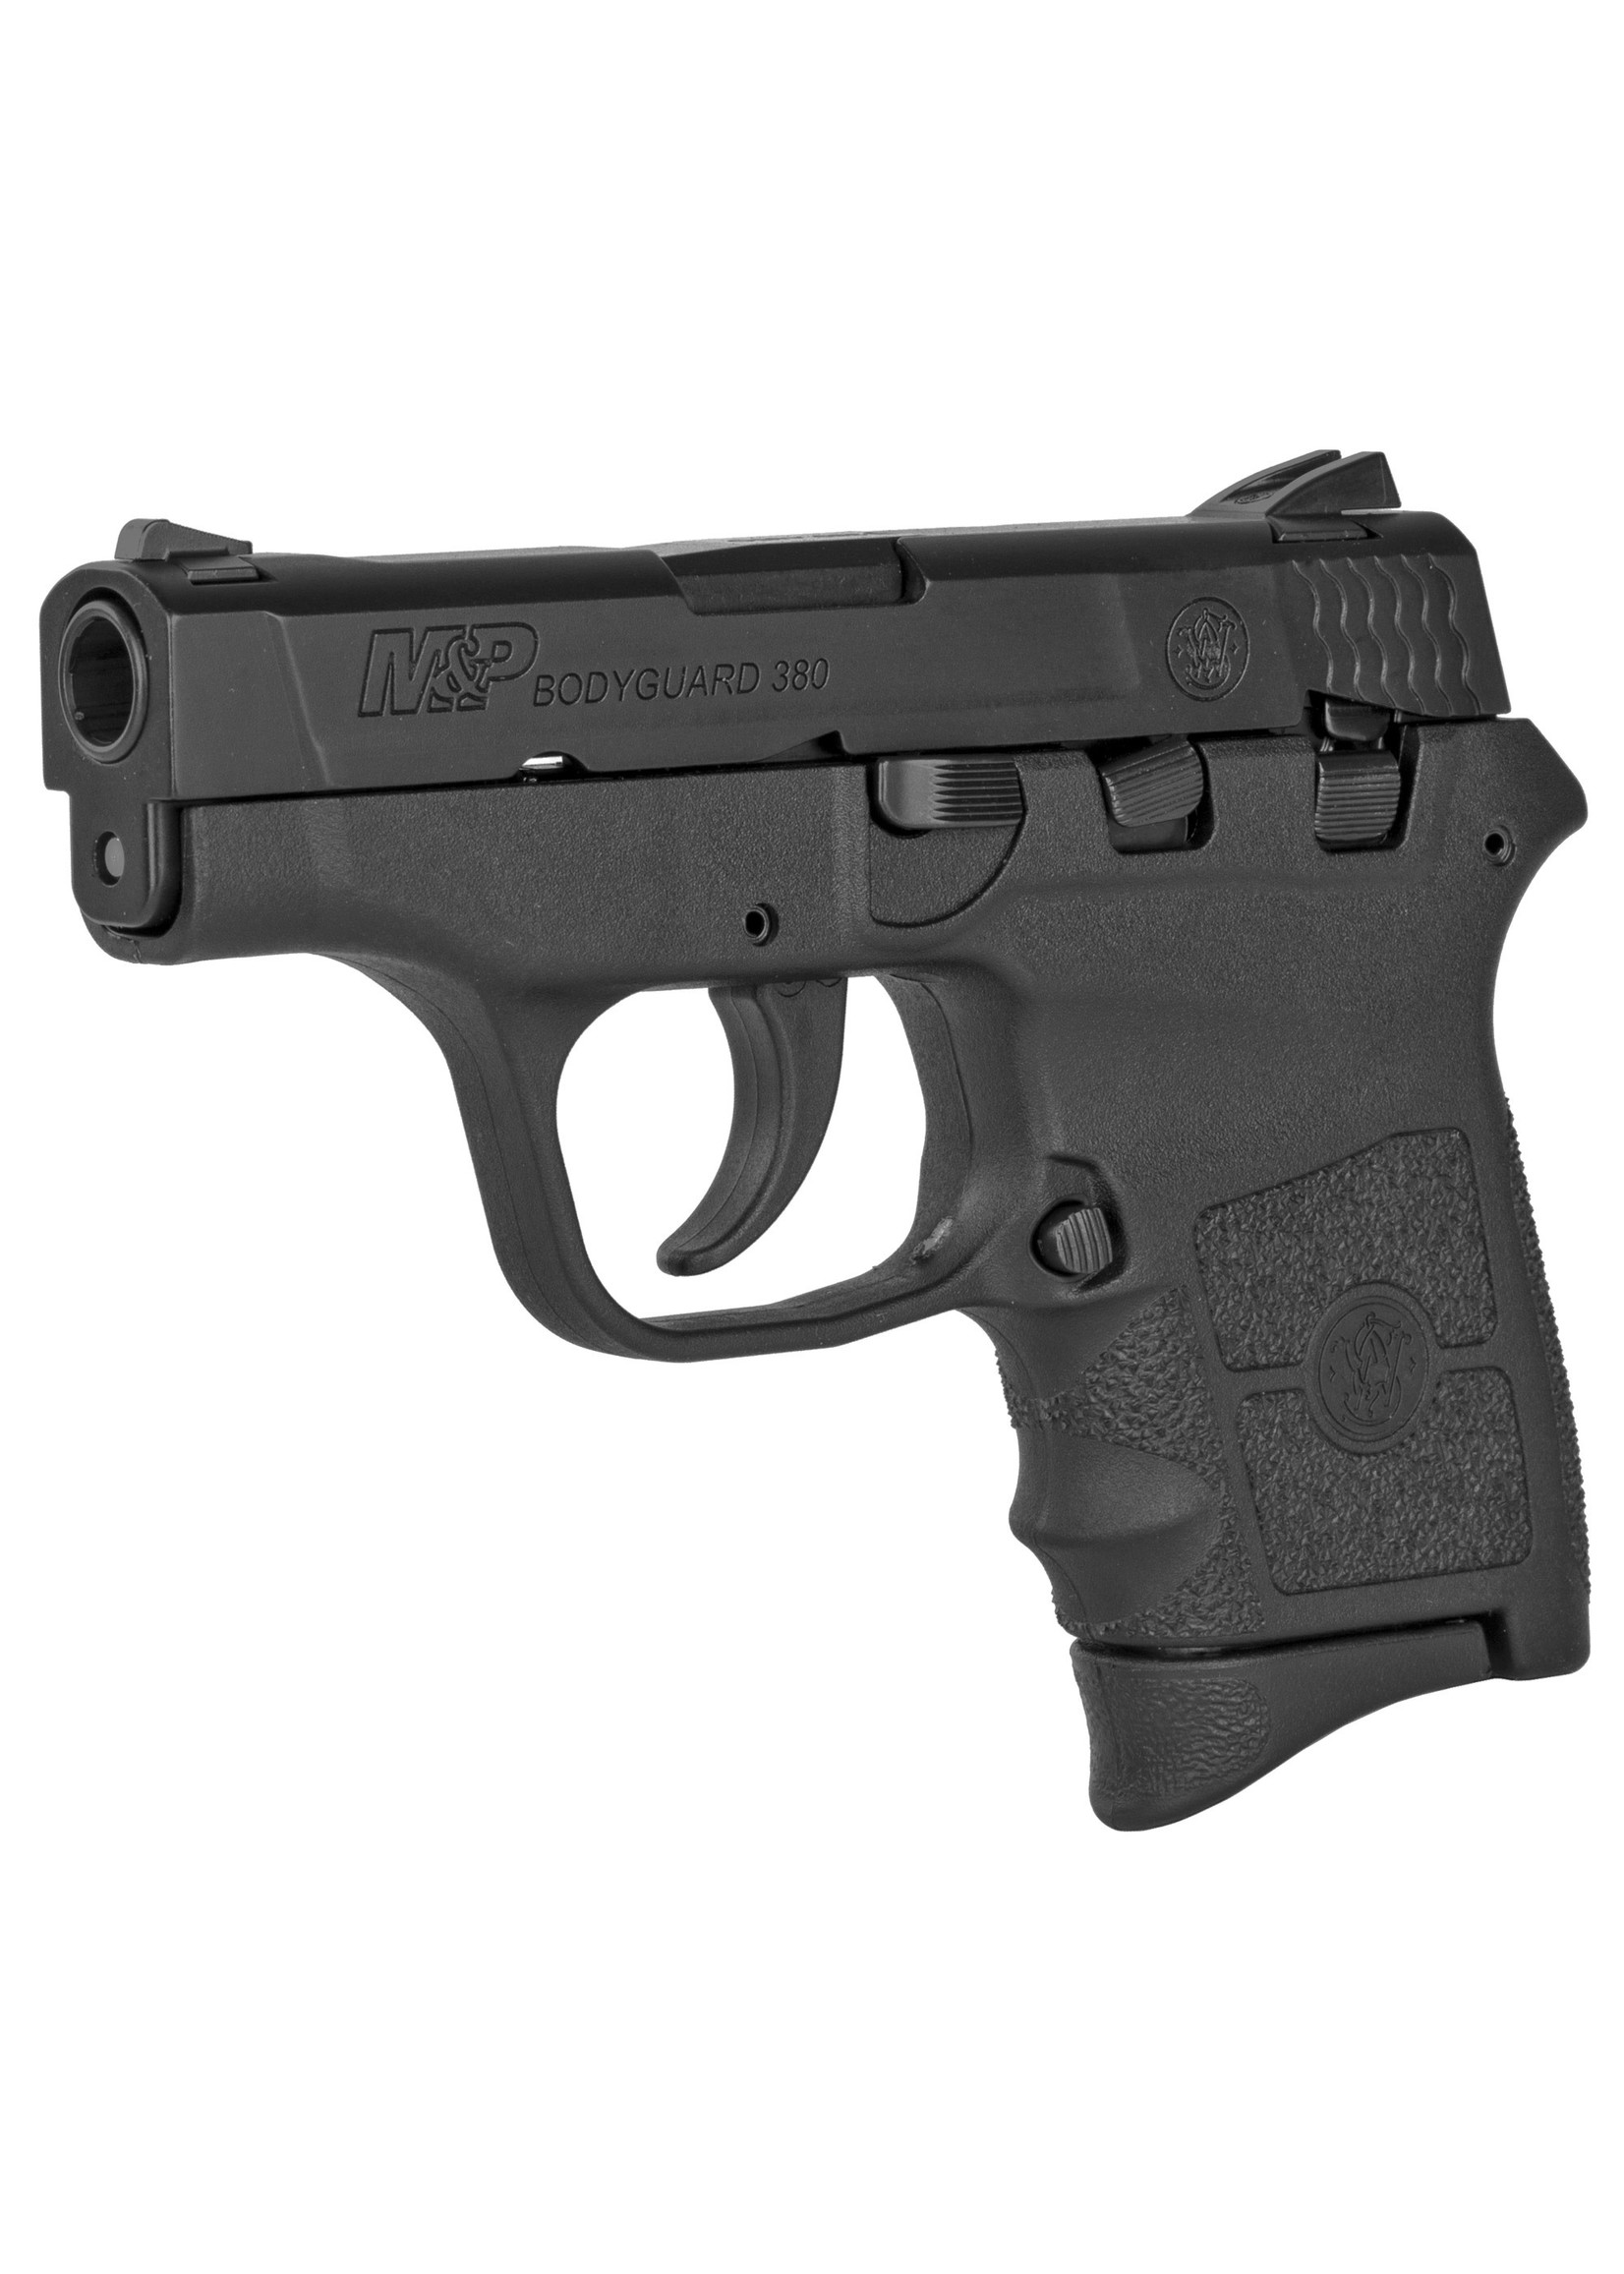 Smith and Wesson (S&W) Smith & Wesson, M&P Bodyguard, Double Action Only, Semi-Automatic, Polymer Frame Pistol, Sub-Compact, 380ACP, 2.75" Barrel, Armornite Finish, Black, Fixed Sights, 6 Round, 2 Magazines